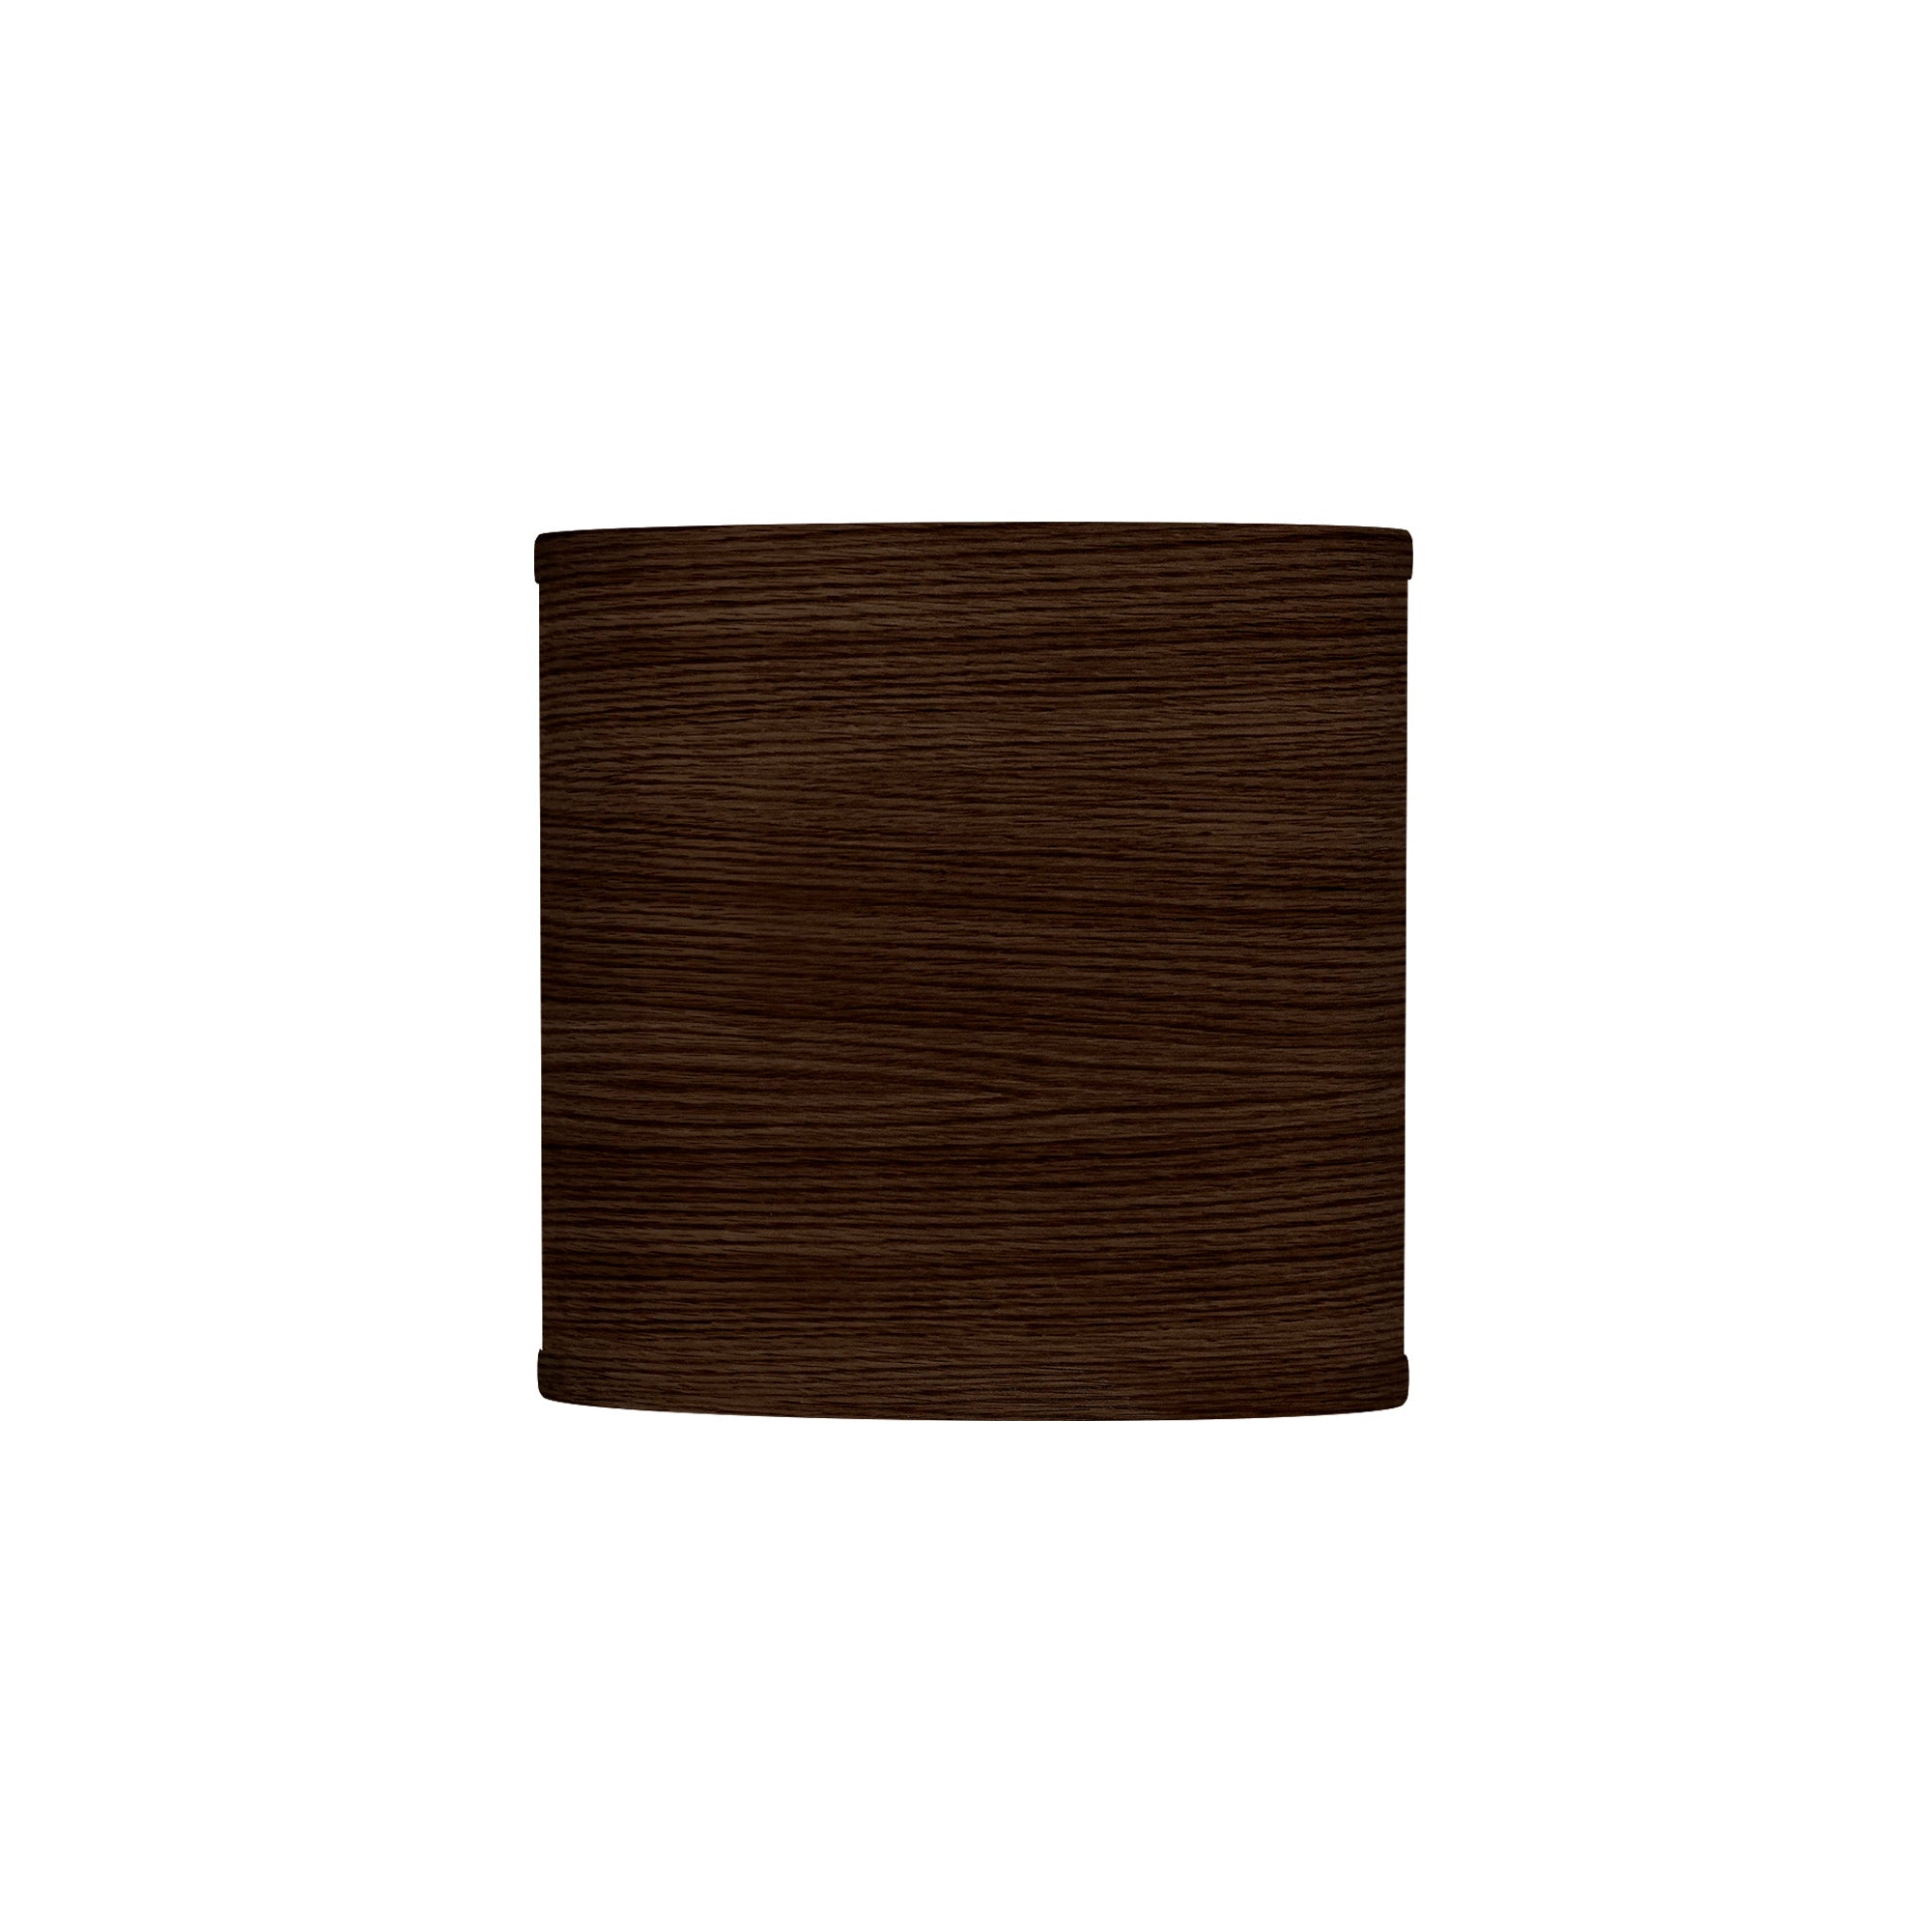 The Bryant Wall Sconce from Seascape Fixtures with a photo veneer shade in chocolate color.